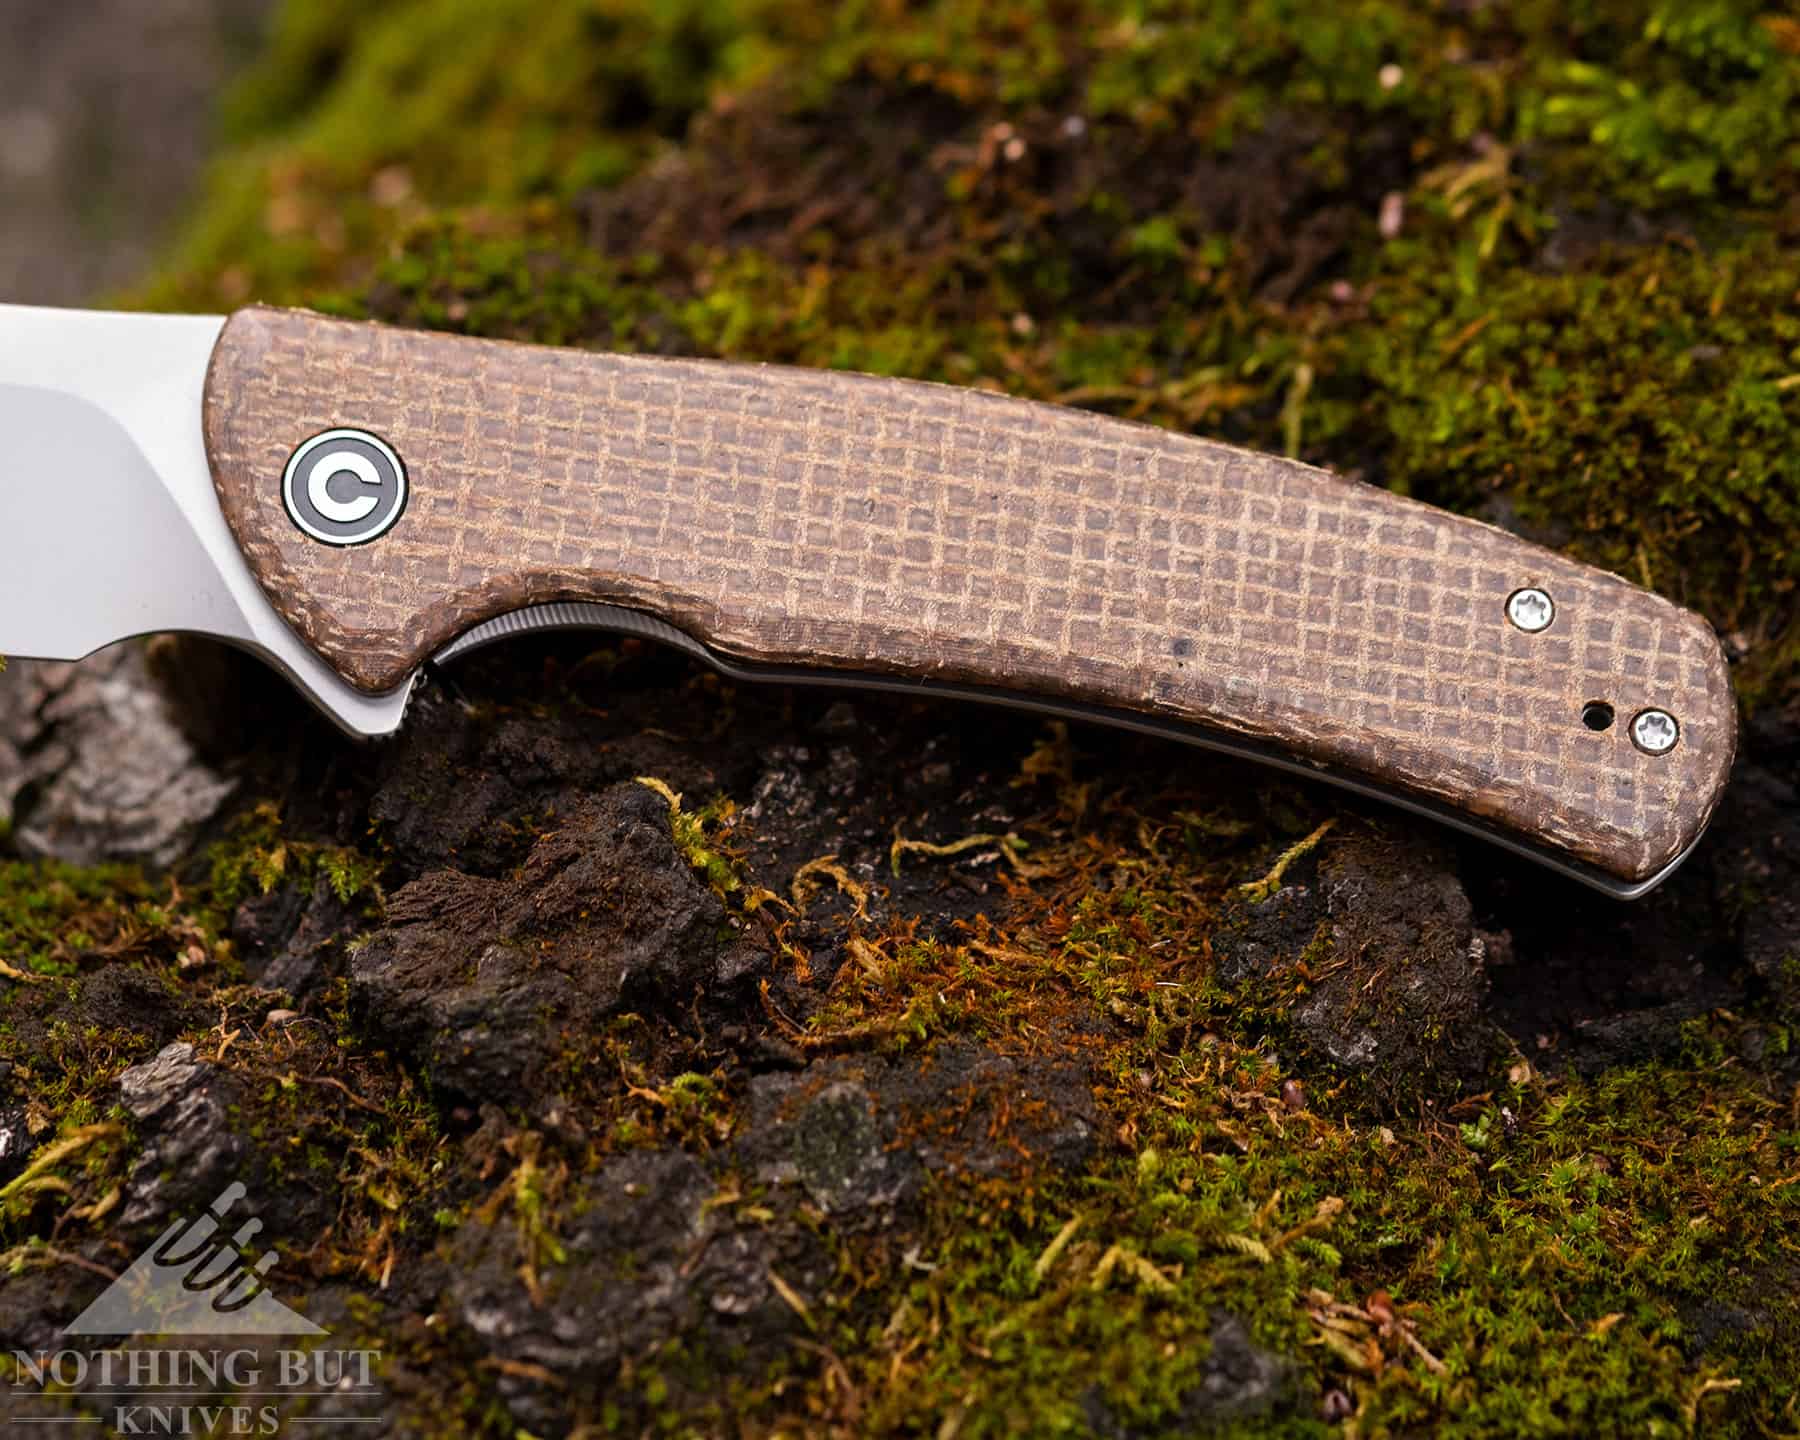 The Micarta side of the Sinisys handle is rough to enough to provide good traction.